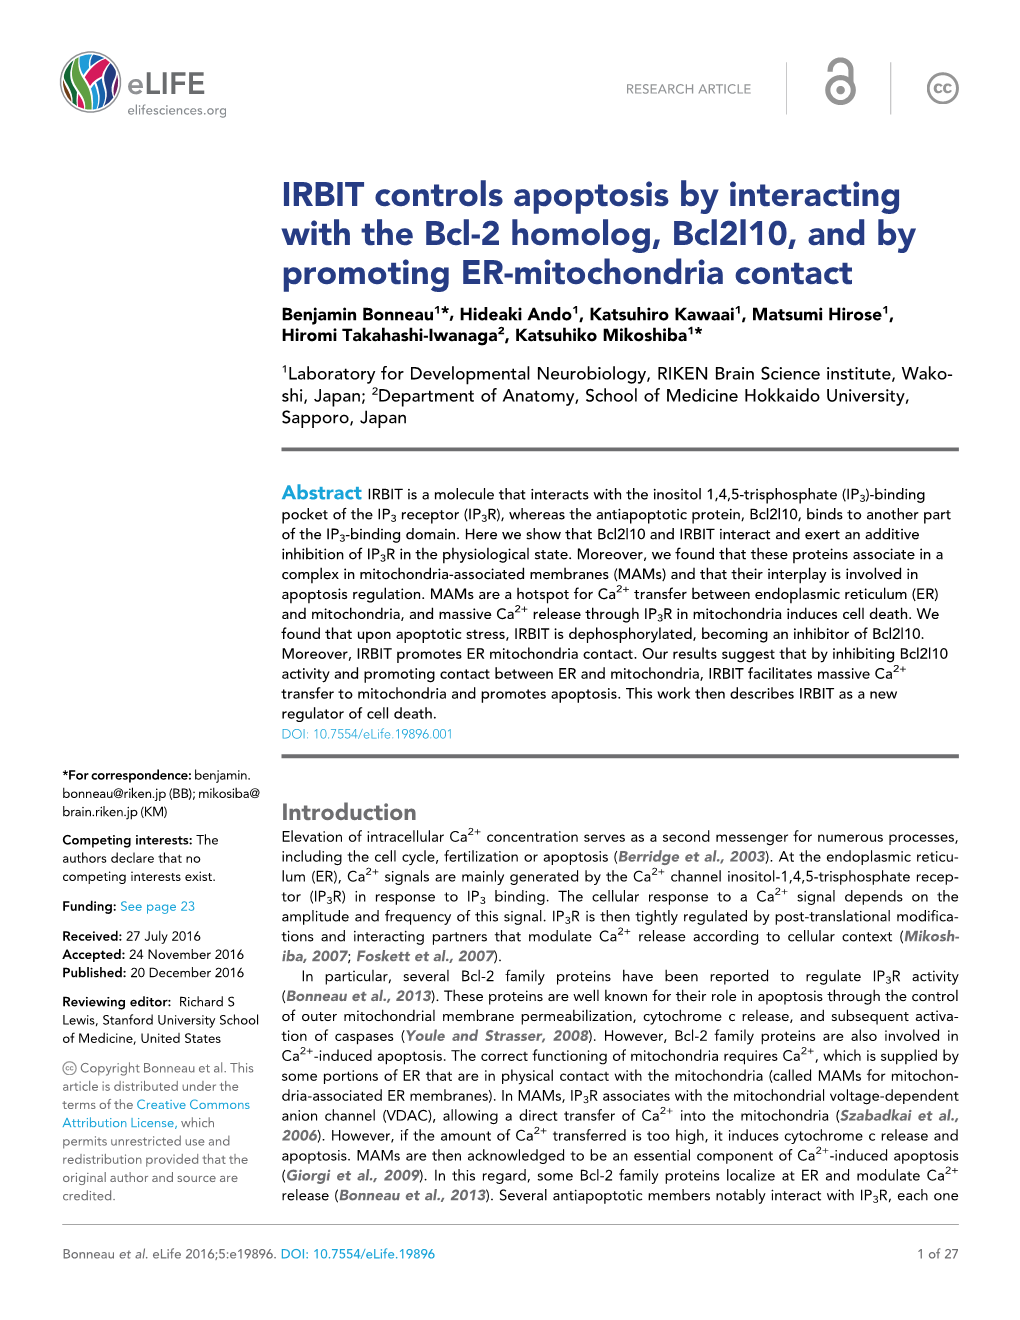 IRBIT Controls Apoptosis by Interacting with the Bcl-2 Homolog, Bcl2l10